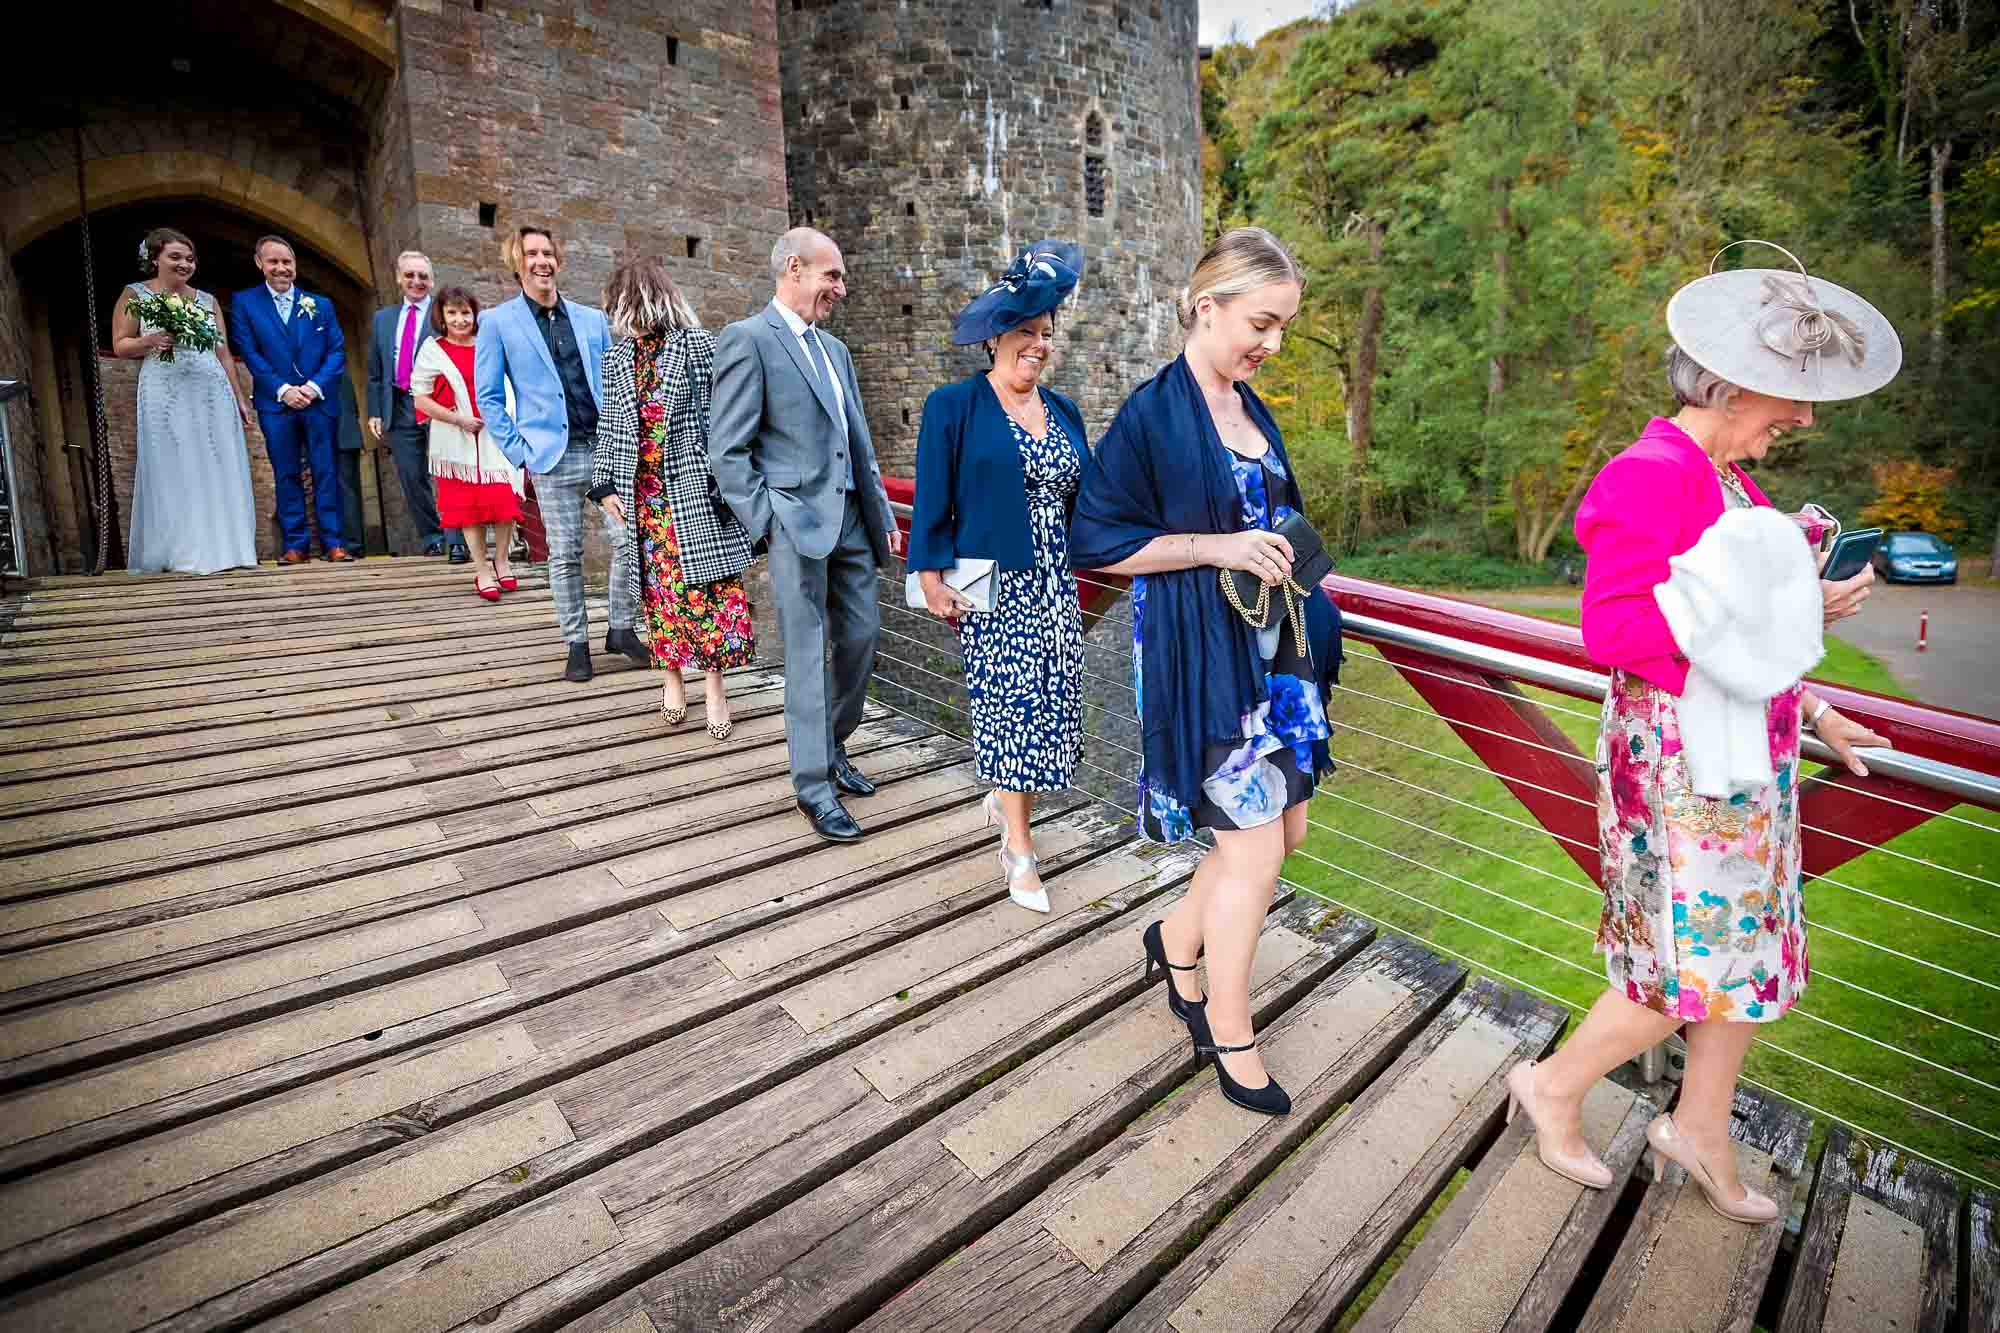 Wedding guests leaving Castell Coch, being very careful not to trap their heels in the drawbridge gaps